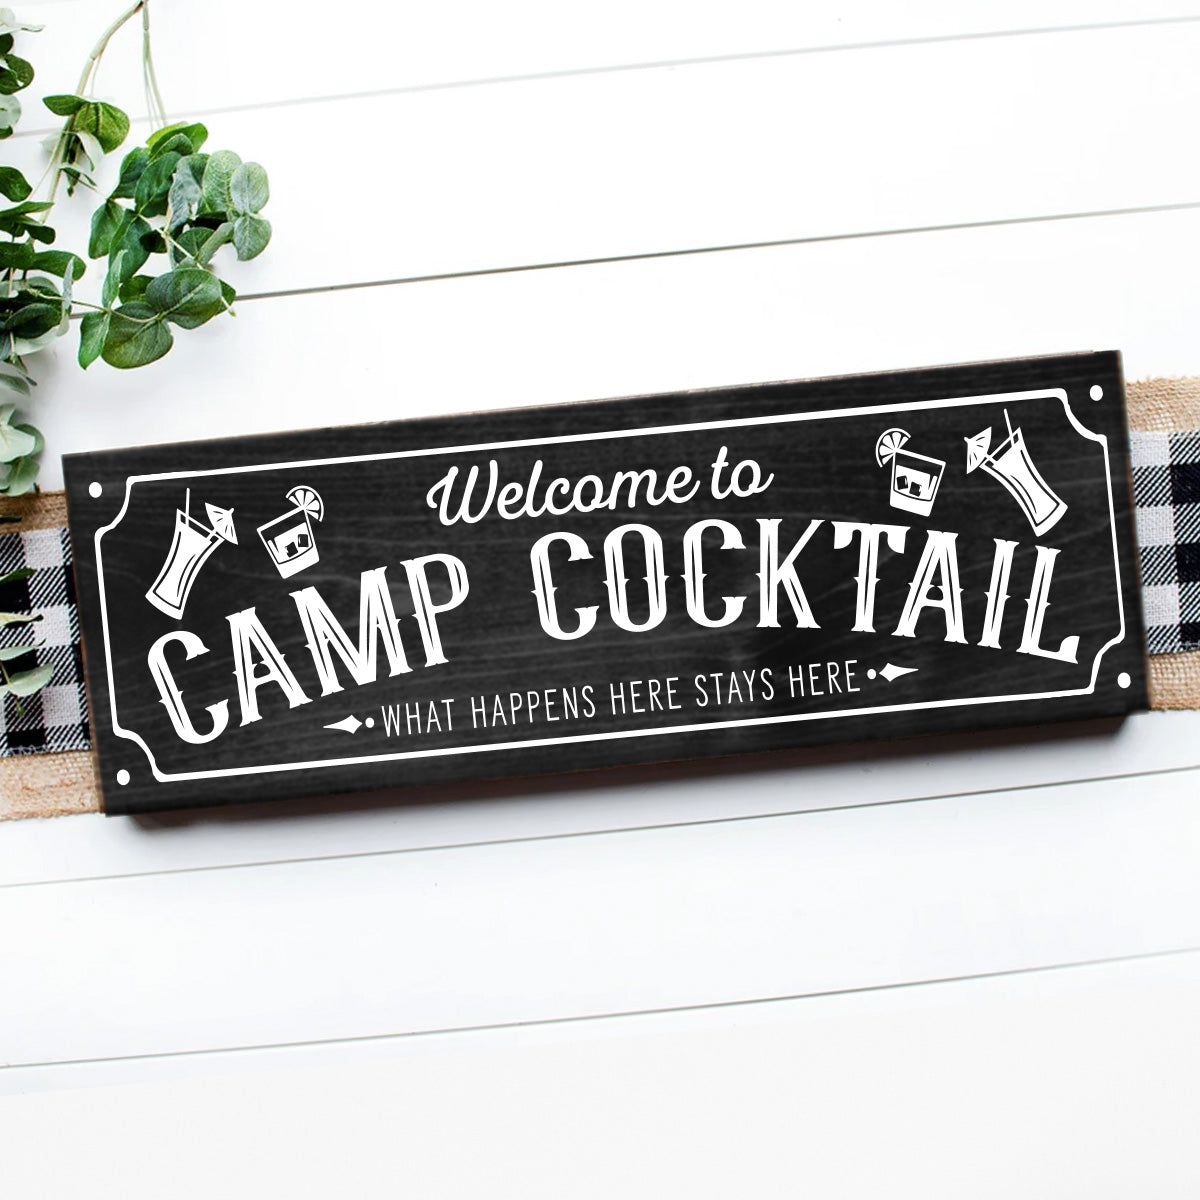 CAMP COCKTAIL -Fresh Kenny's May 29th 6:30 PM